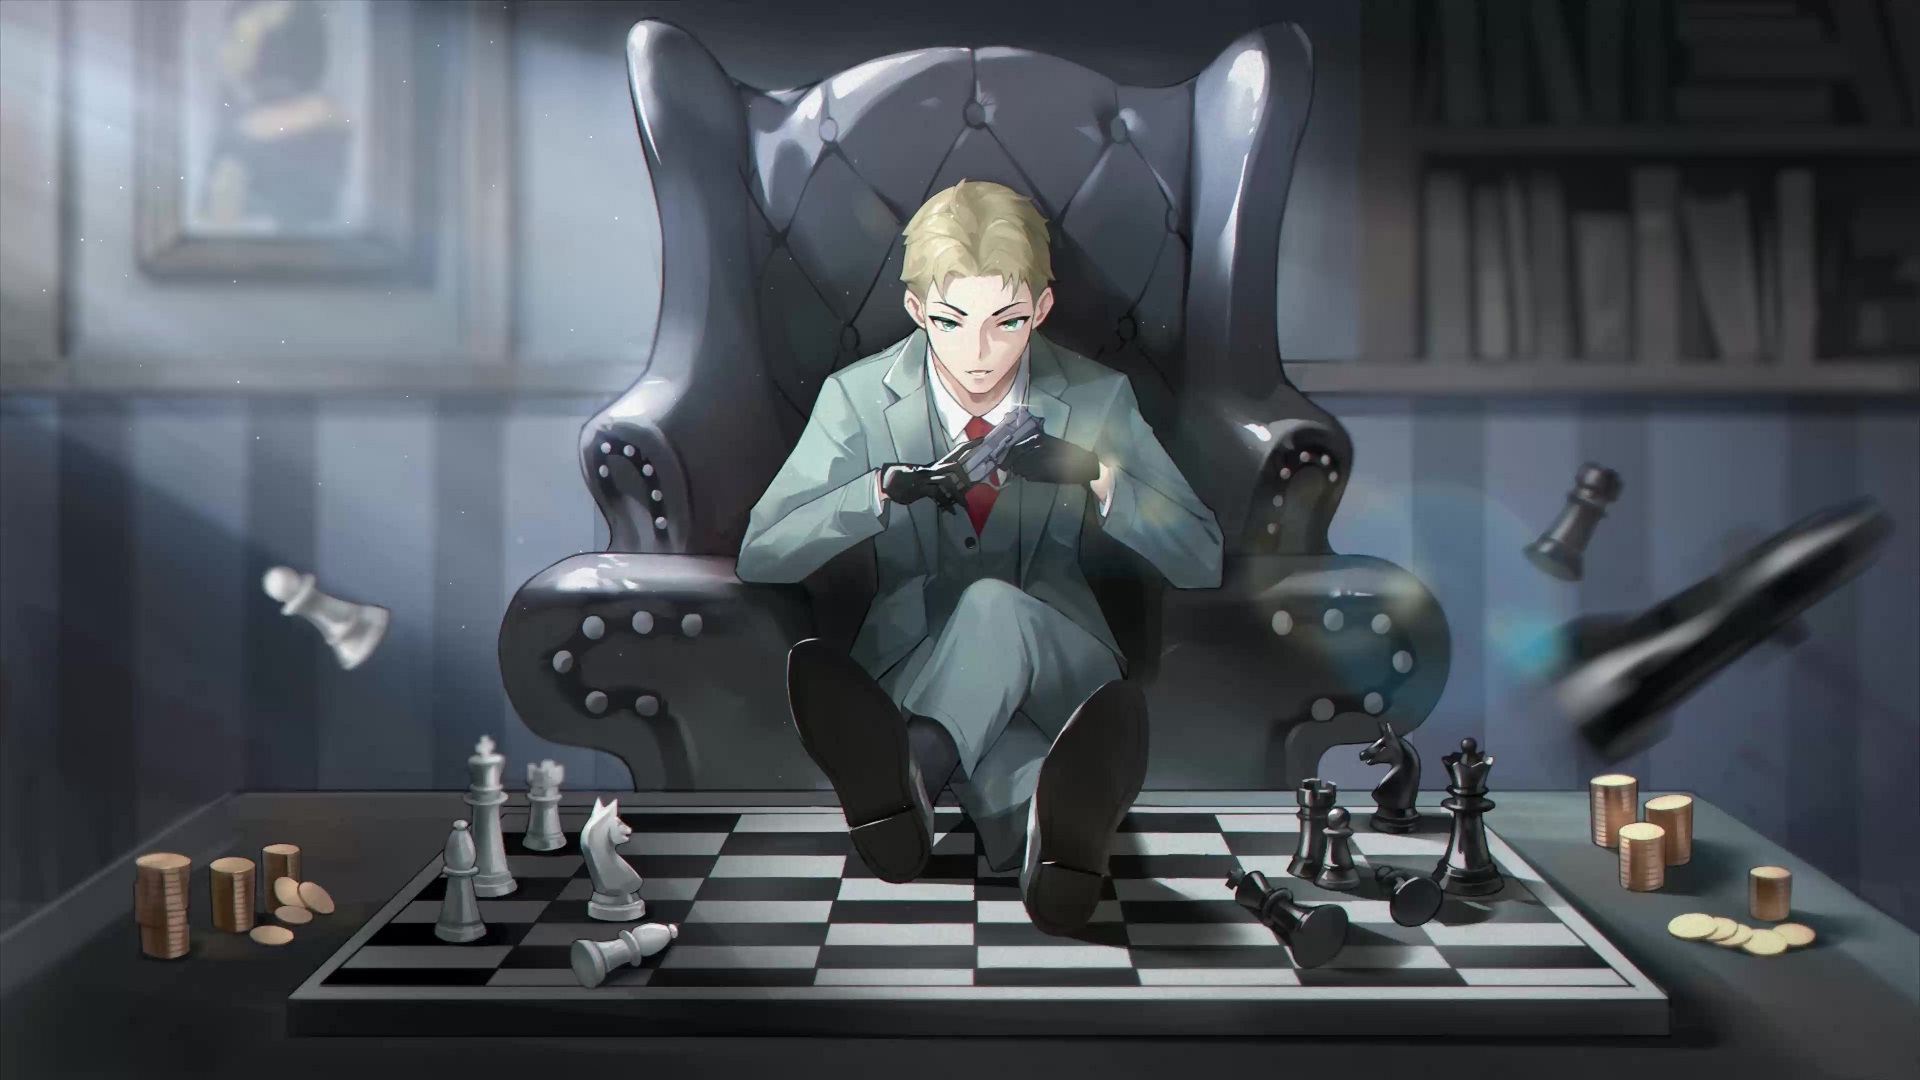 Is there an Anime or Manga based on chess? - Quora